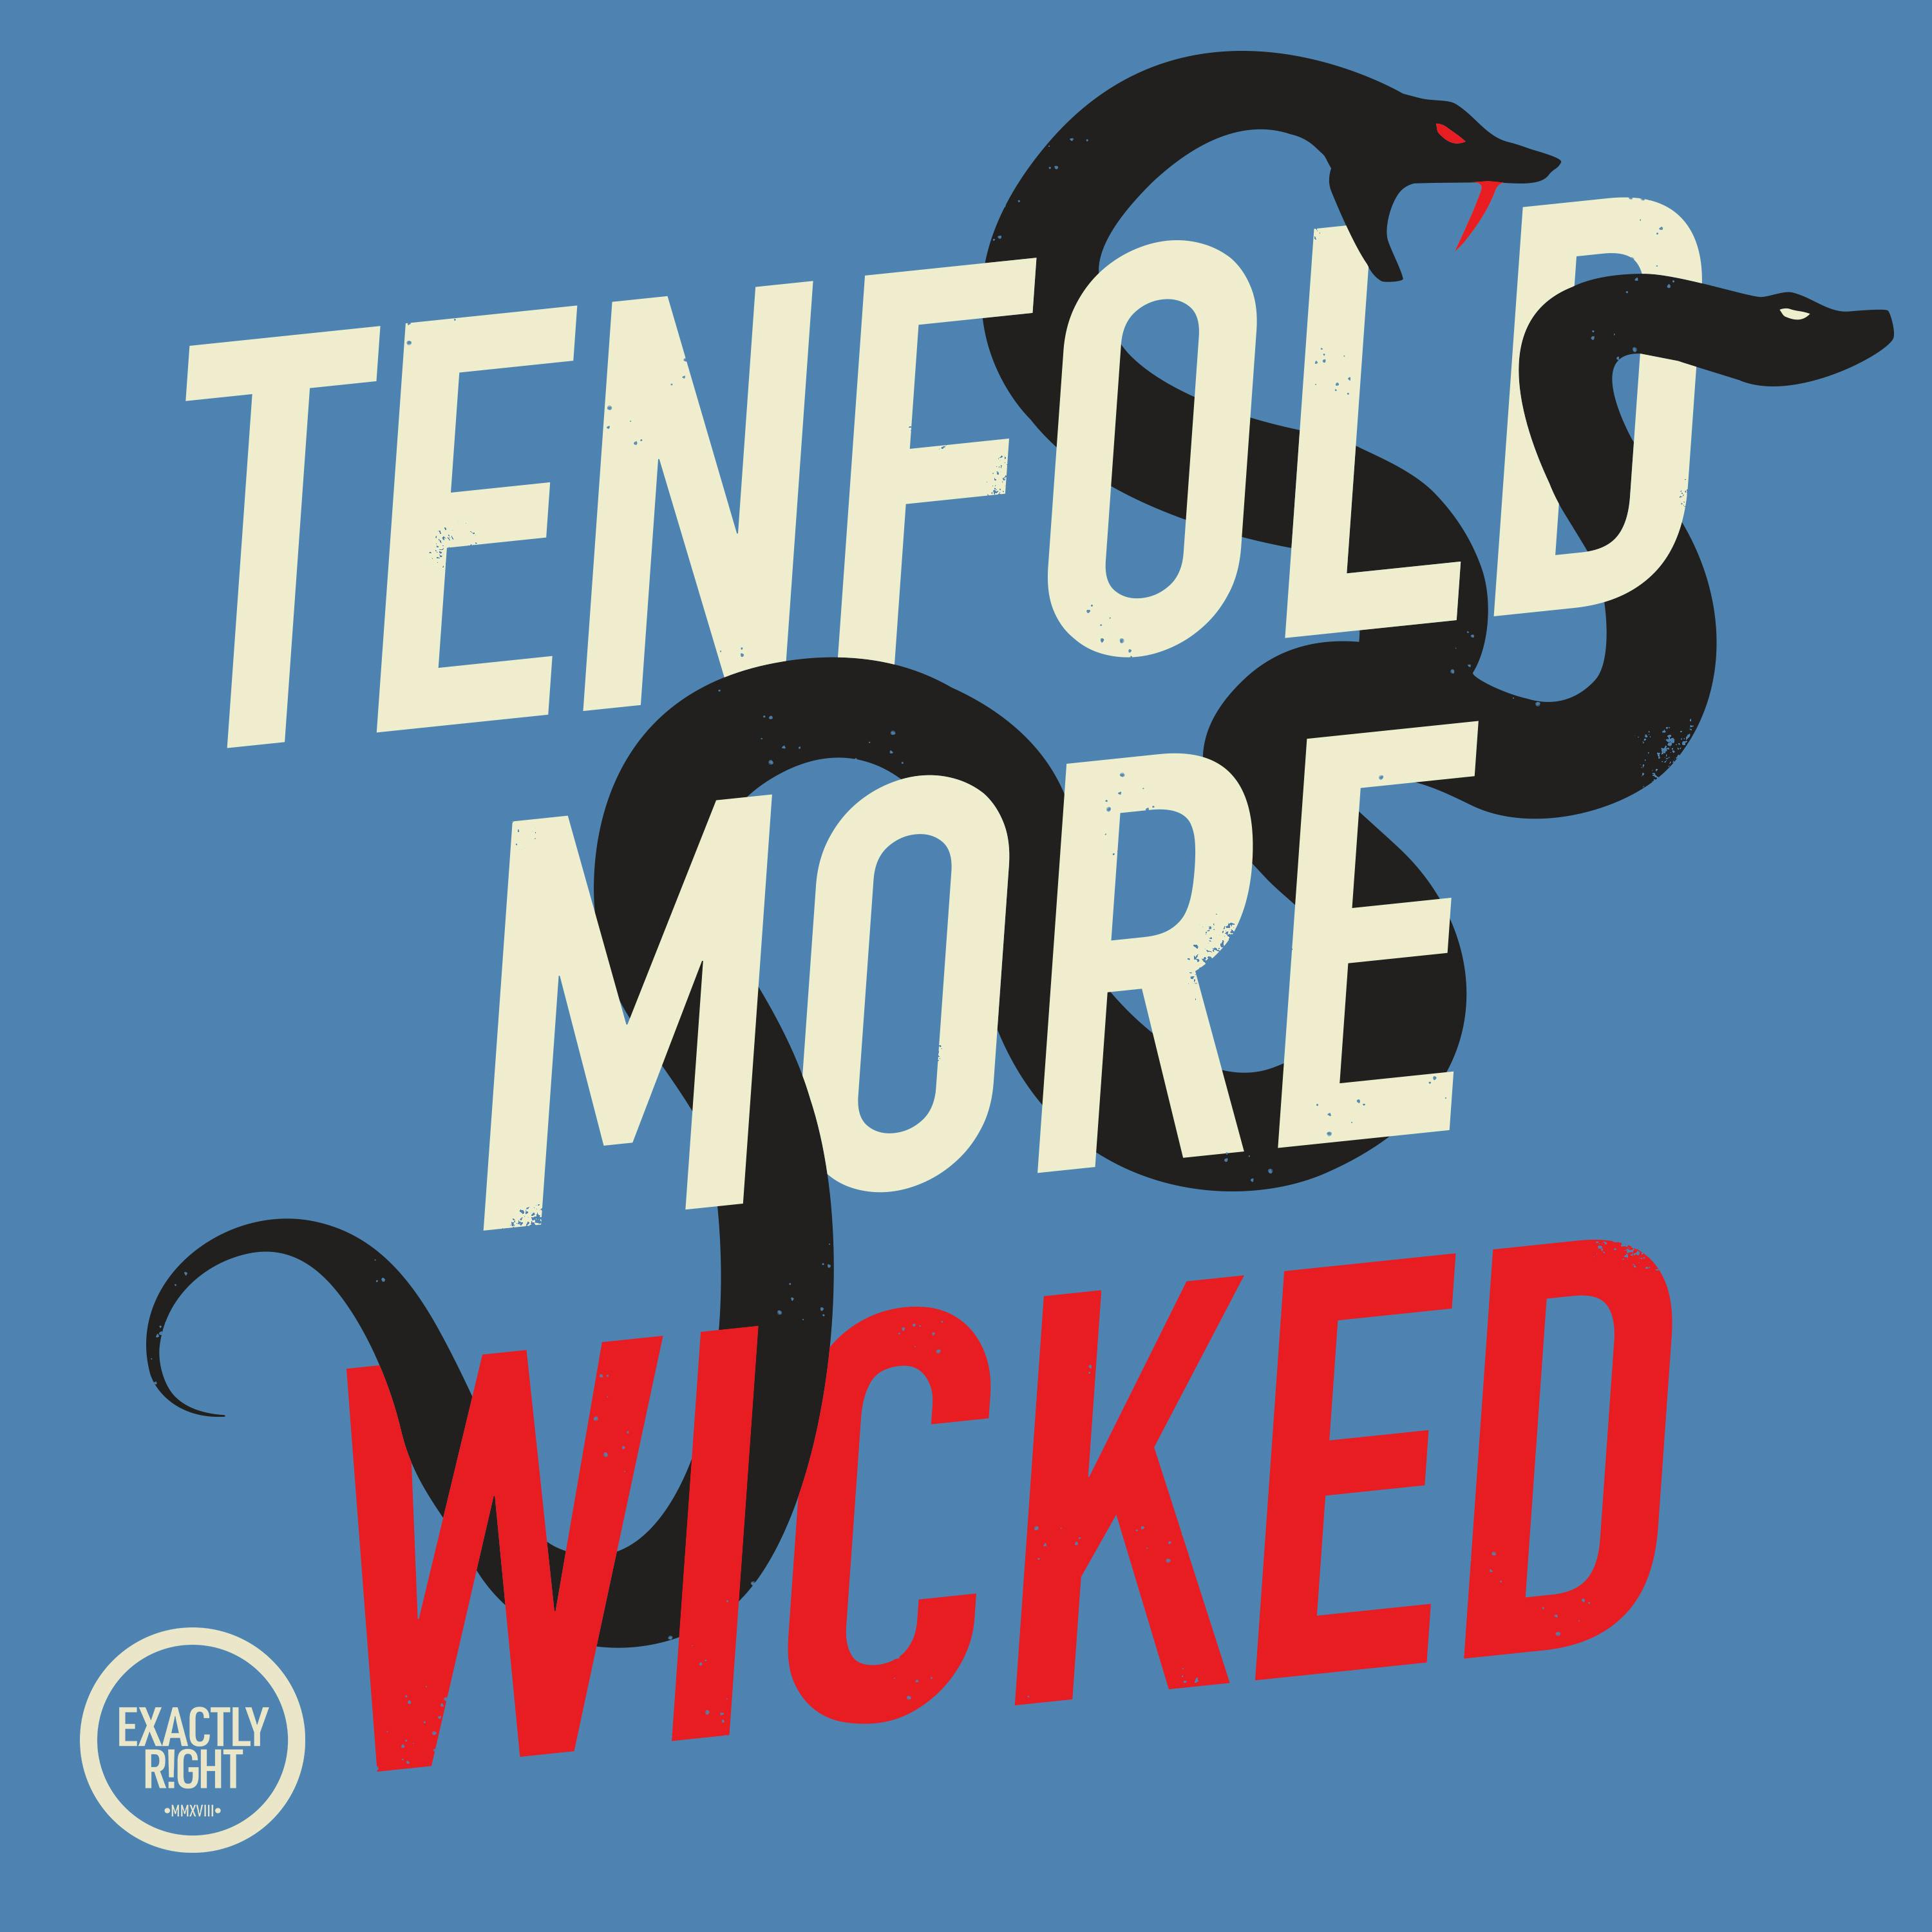 Tenfold More Wicked - A Blessing and a Curse: Family Ties